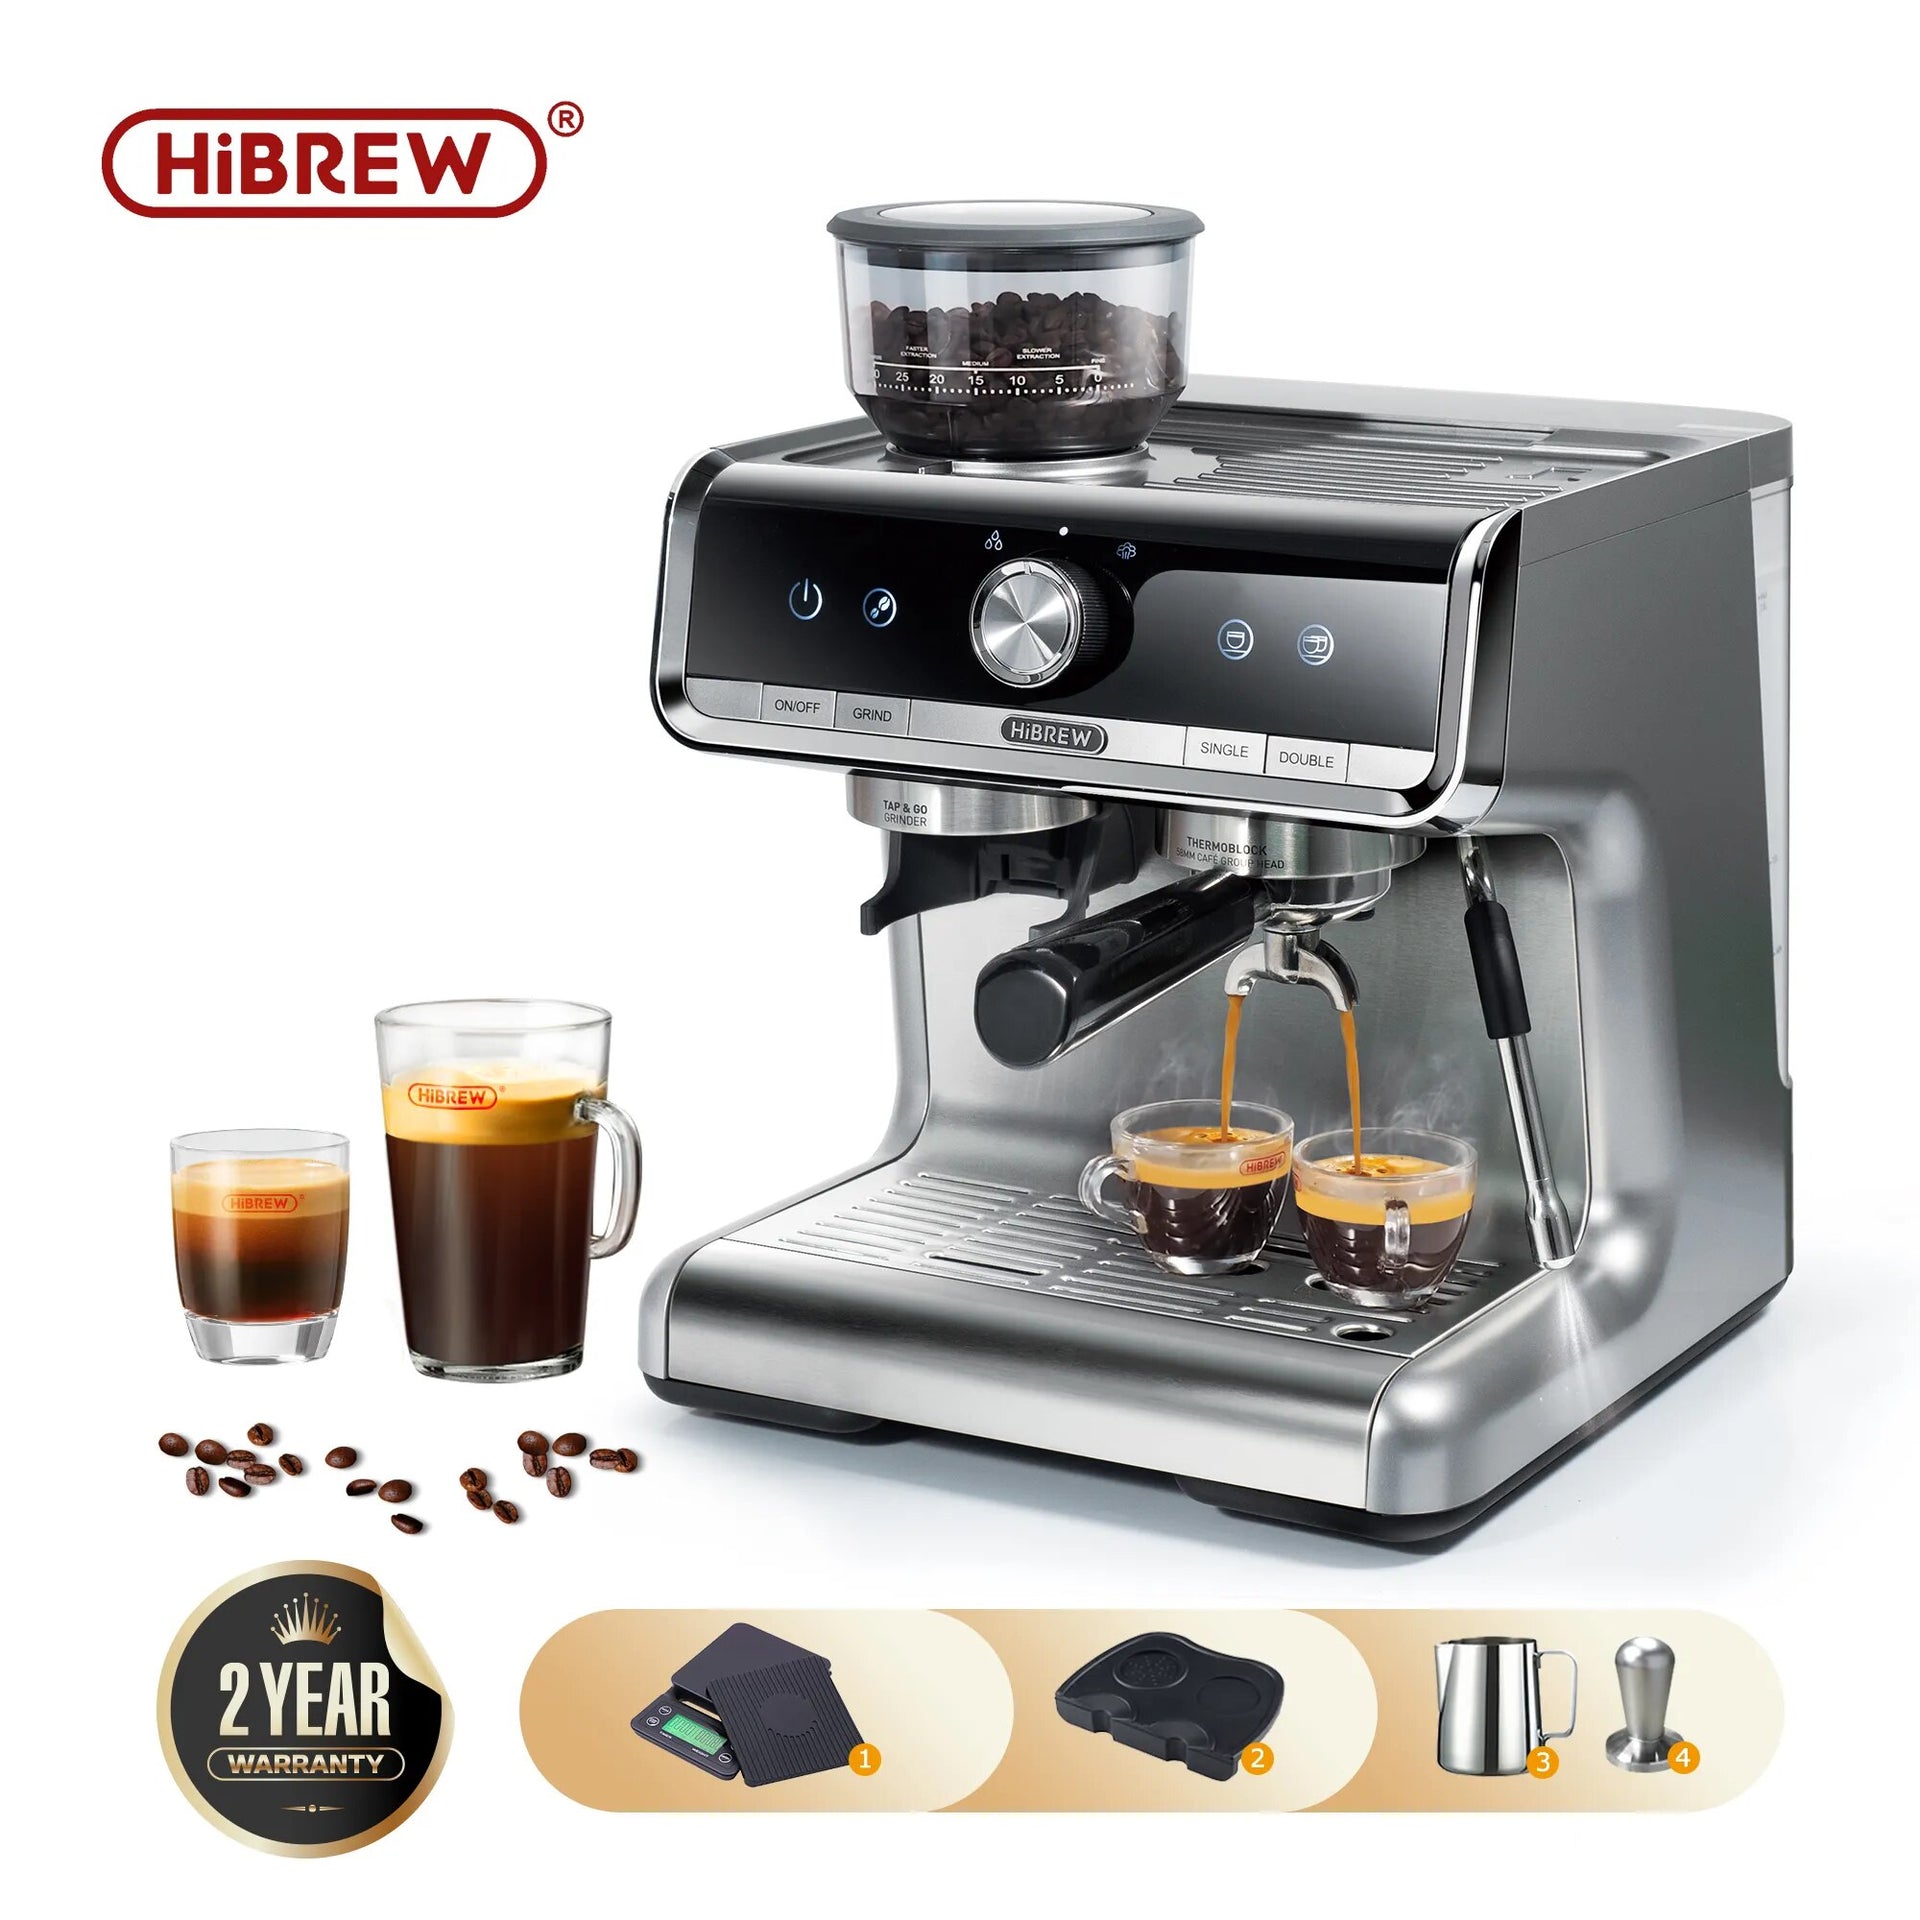 Find your favorite product Cafetera profesional en cafe, cafetera  profesional 